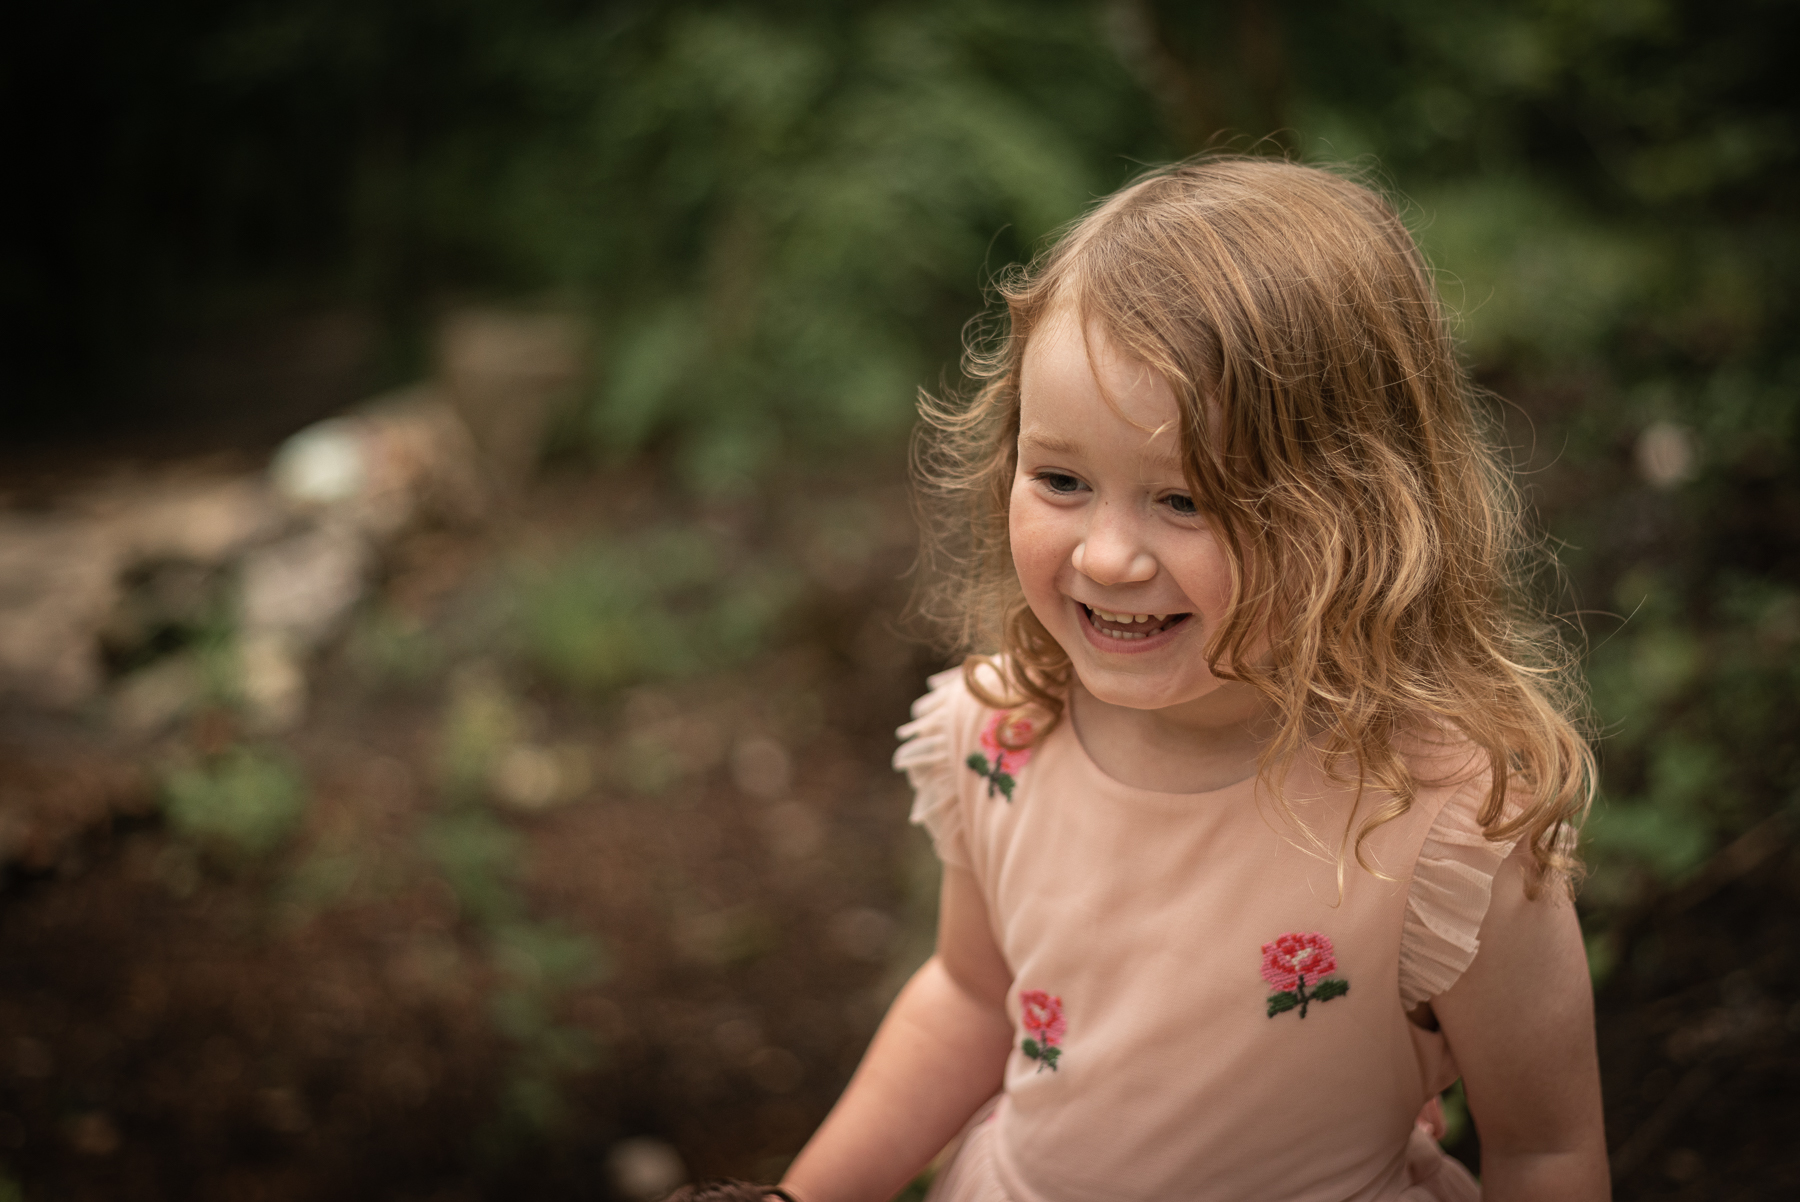 A portrait of a little girl in a pink dress smiling in the woods.